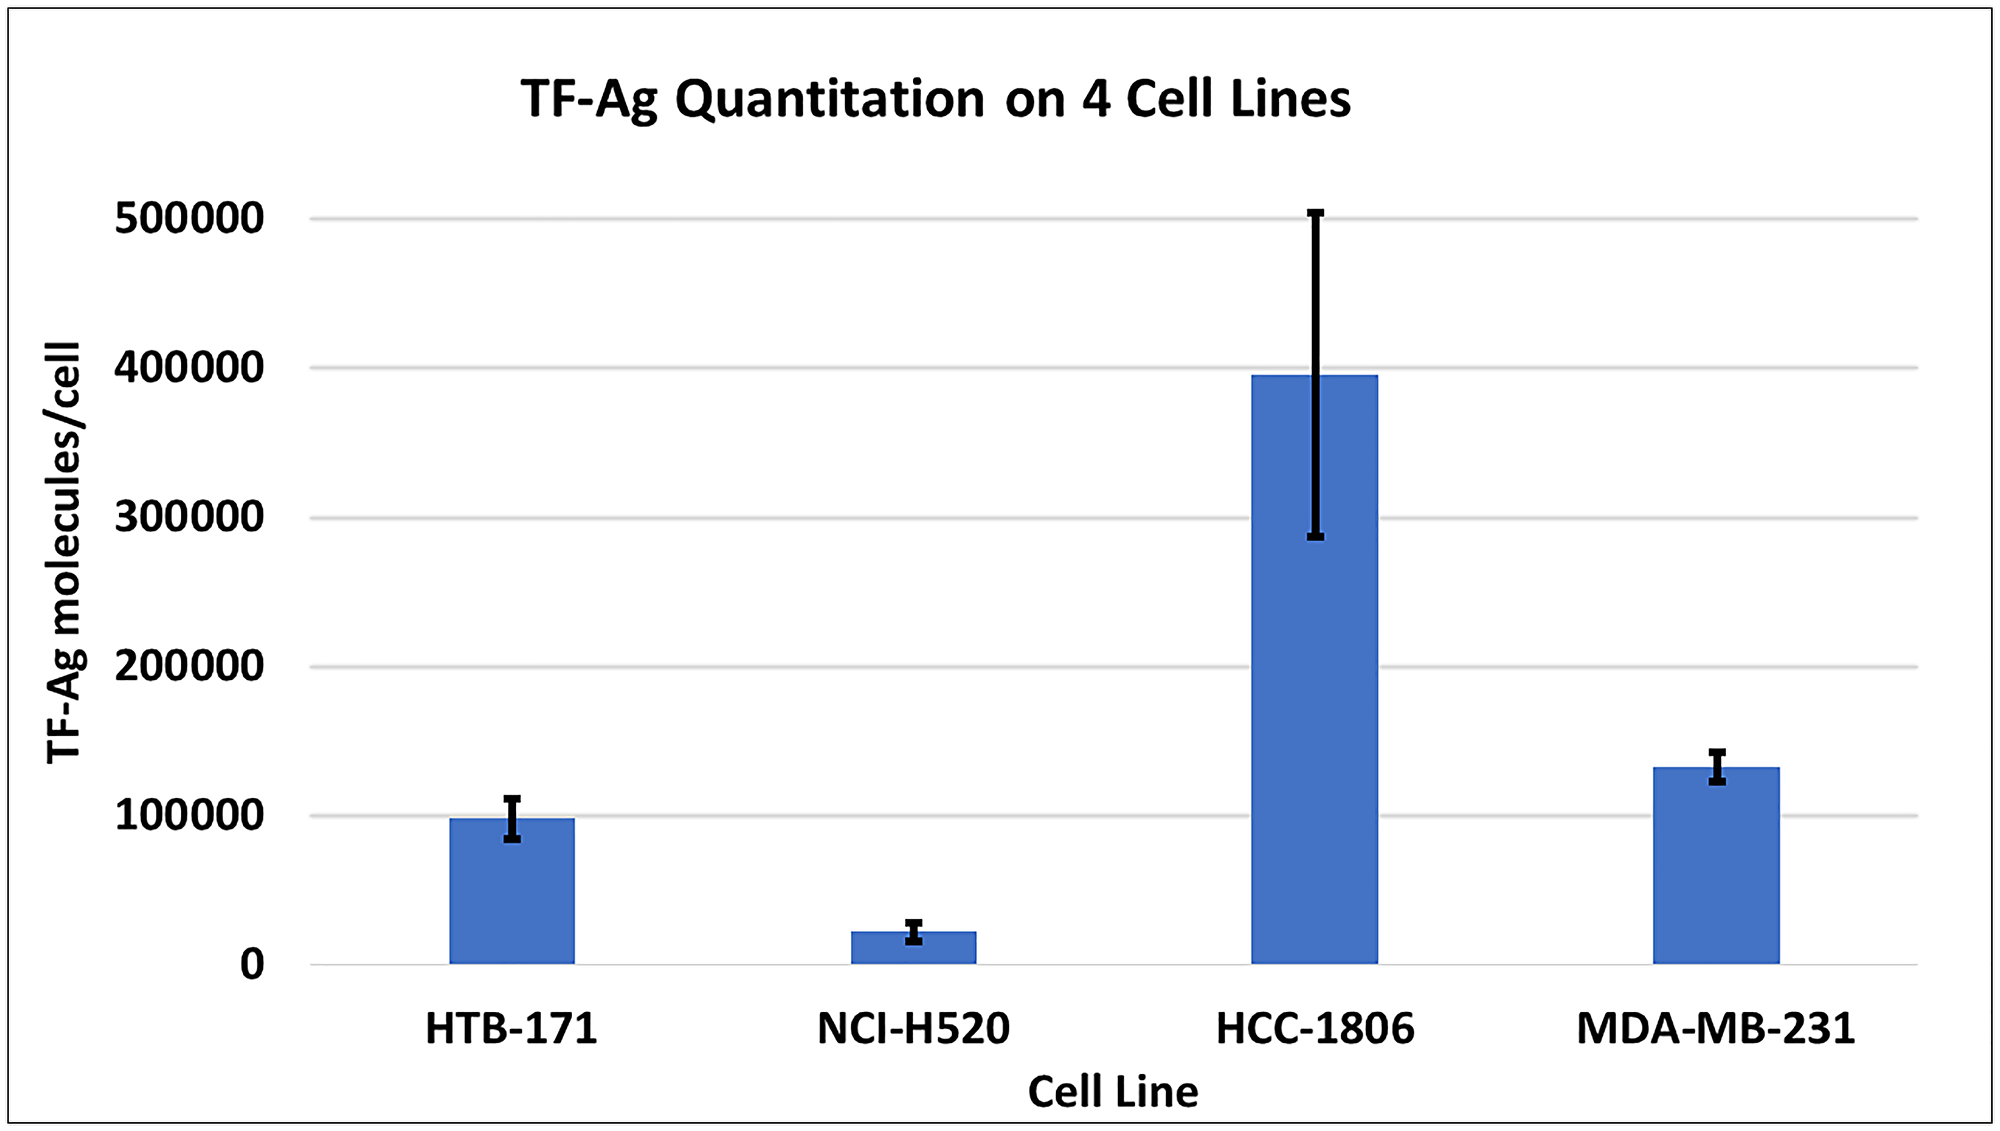 Quantitation of TF-Ag molecules per cell using JAA-F11 in the Bangs method.